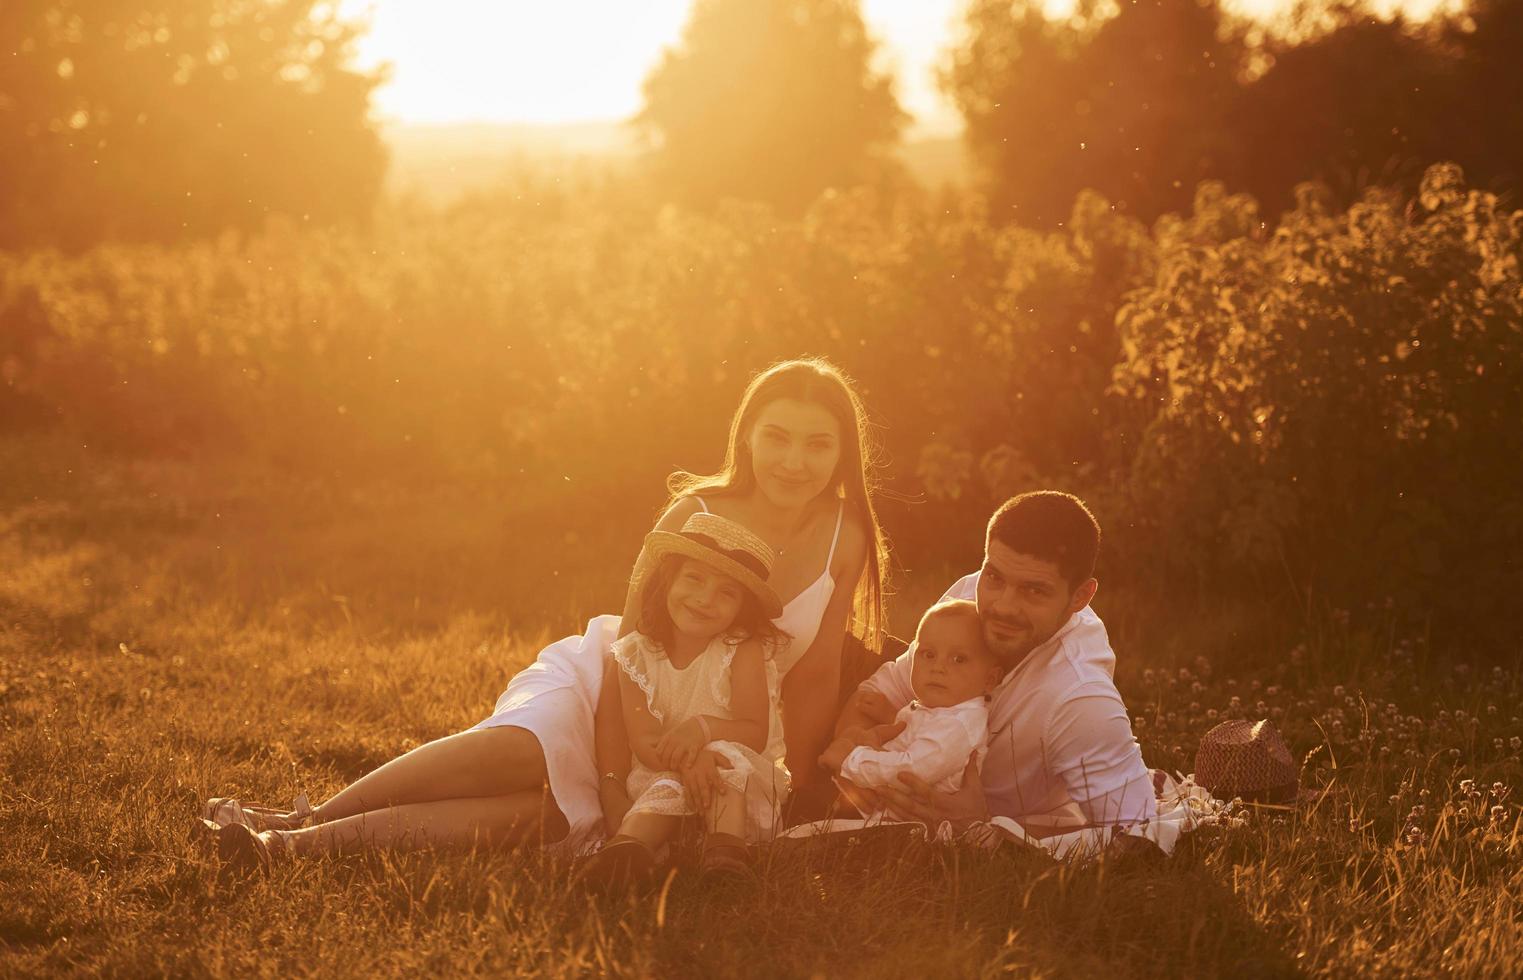 Sitting on the grass. Father, mother with daughter and son spending free time outdoors at sunny day time of summer photo